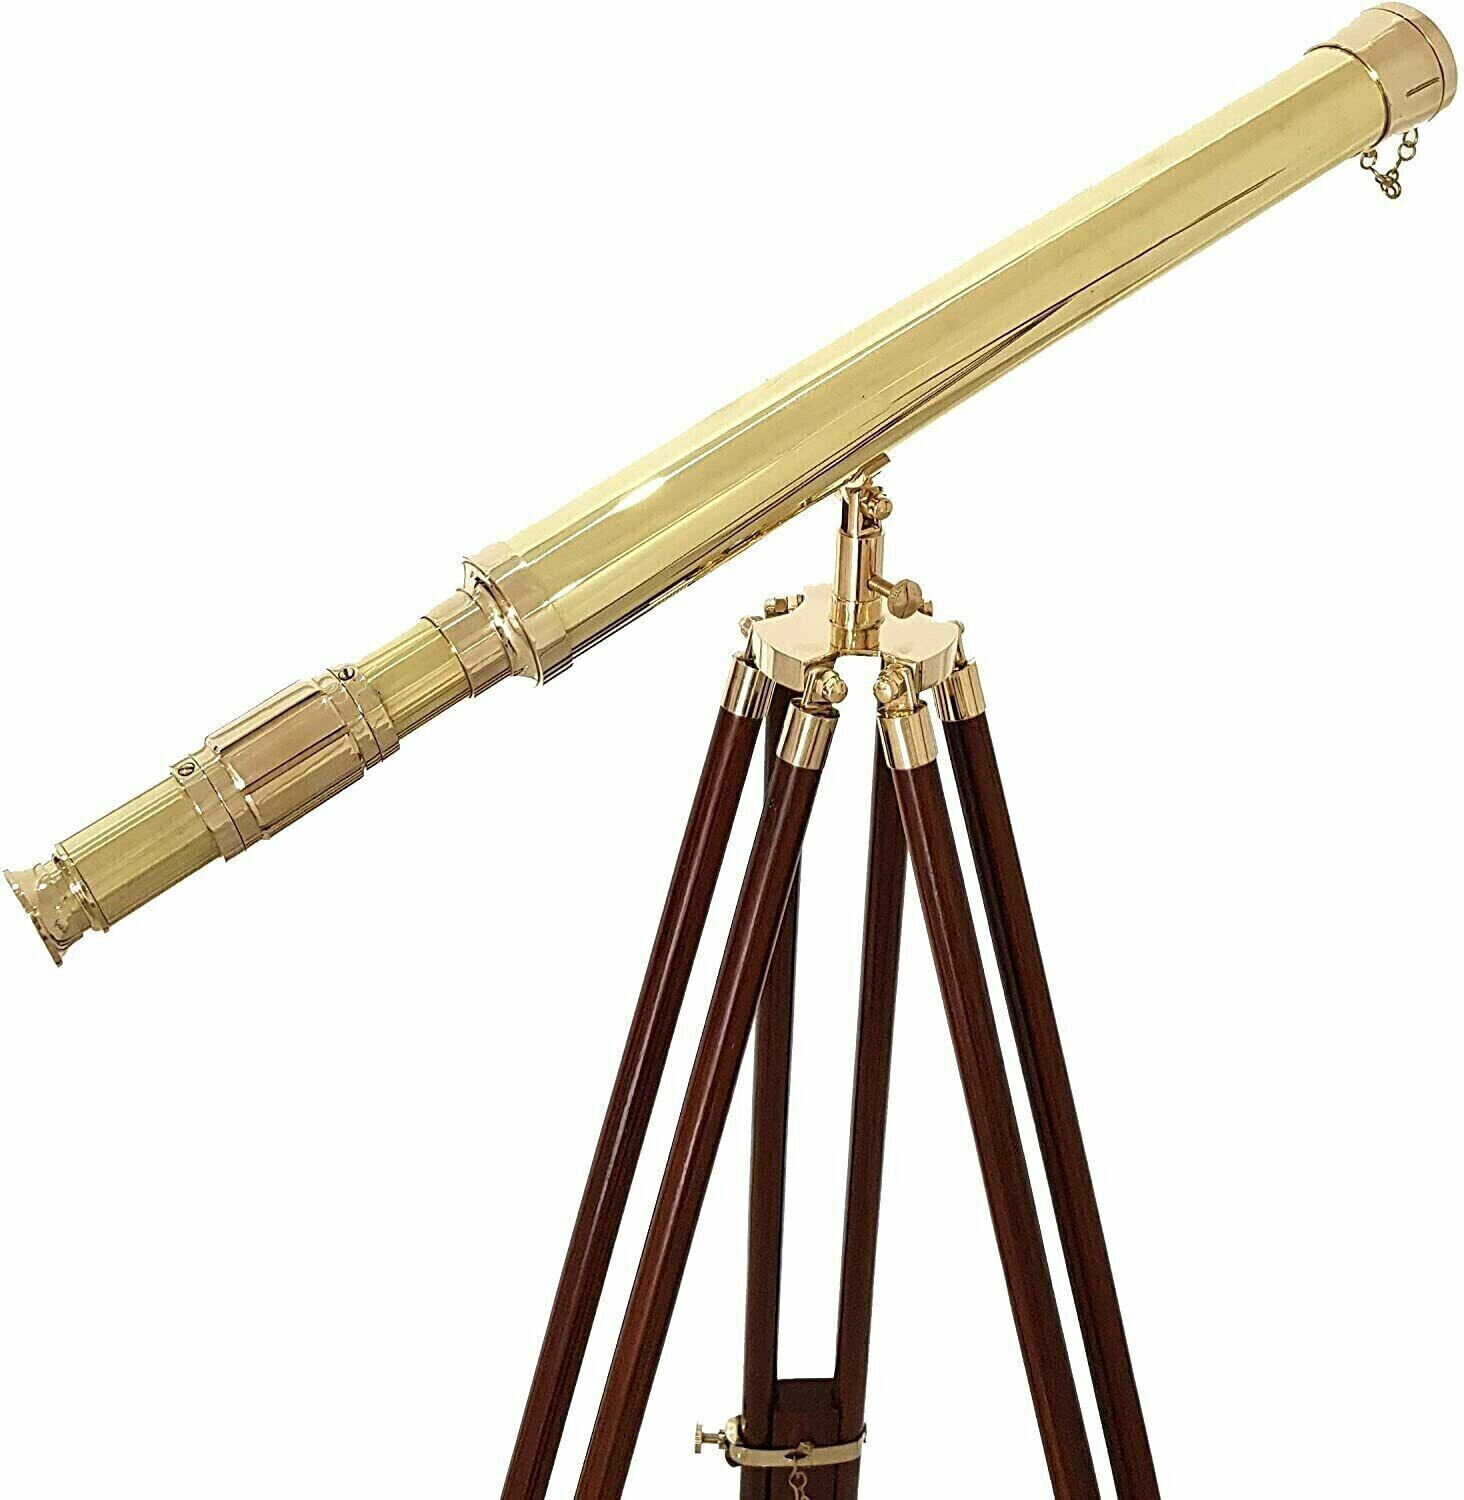 Antique 39 inch Hand-Made Brass Working Telescope WIth Wooden Tripod Stand Gift